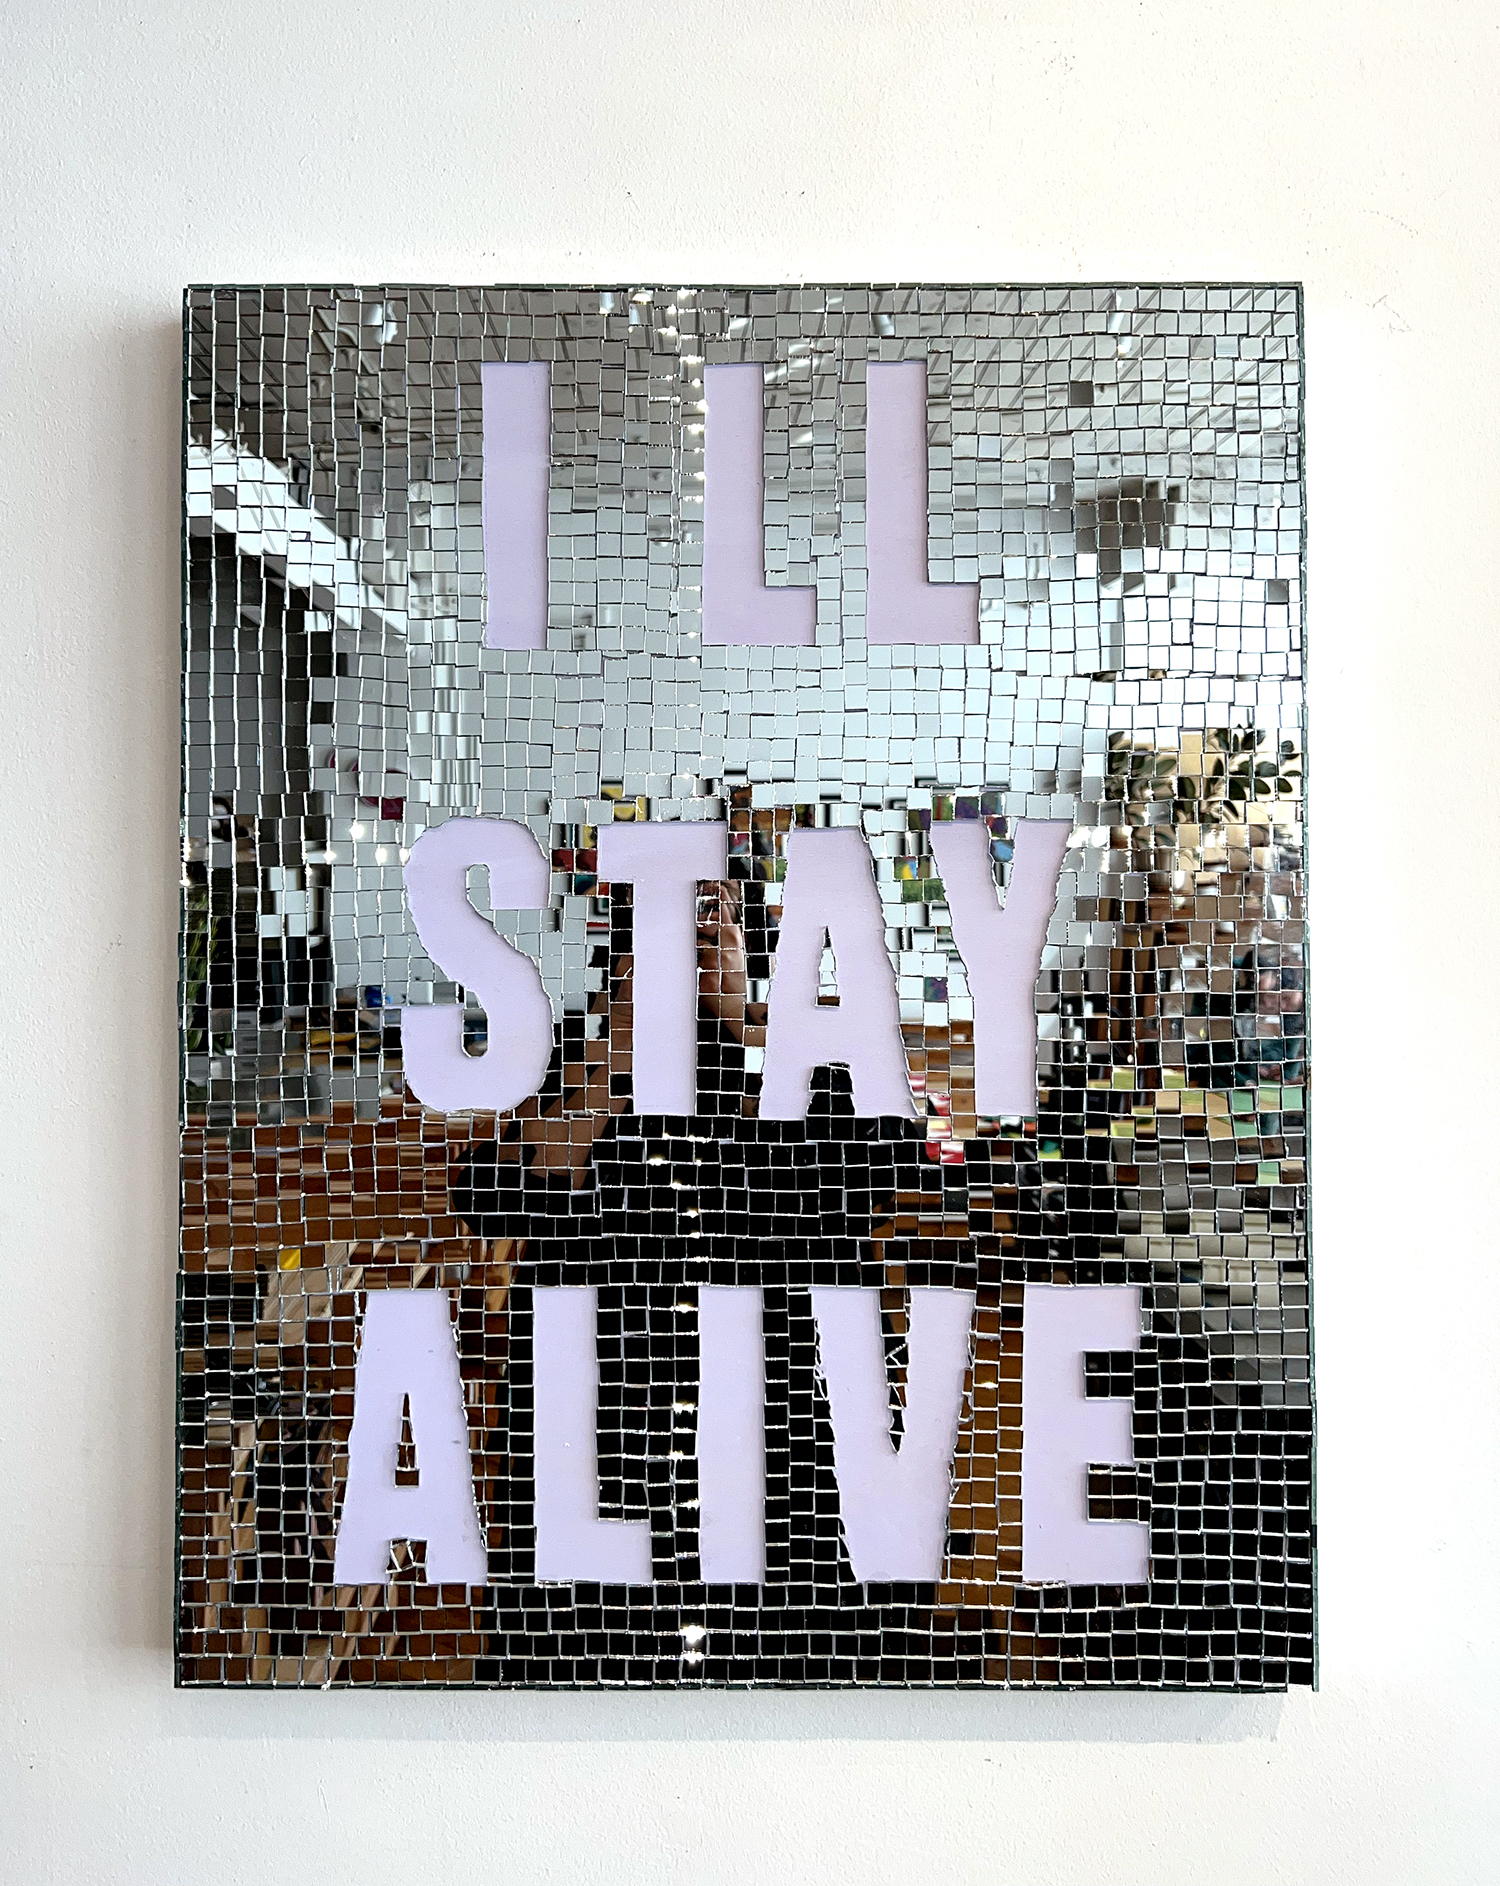 Study for Disco Affirmation (as long as I know how to love, I know I'll stay alive), 2023, Glass tiles and Acrylic on Wood Panel, 30 x 24 x 1.75 inches. (Image courtesy of the artist.)